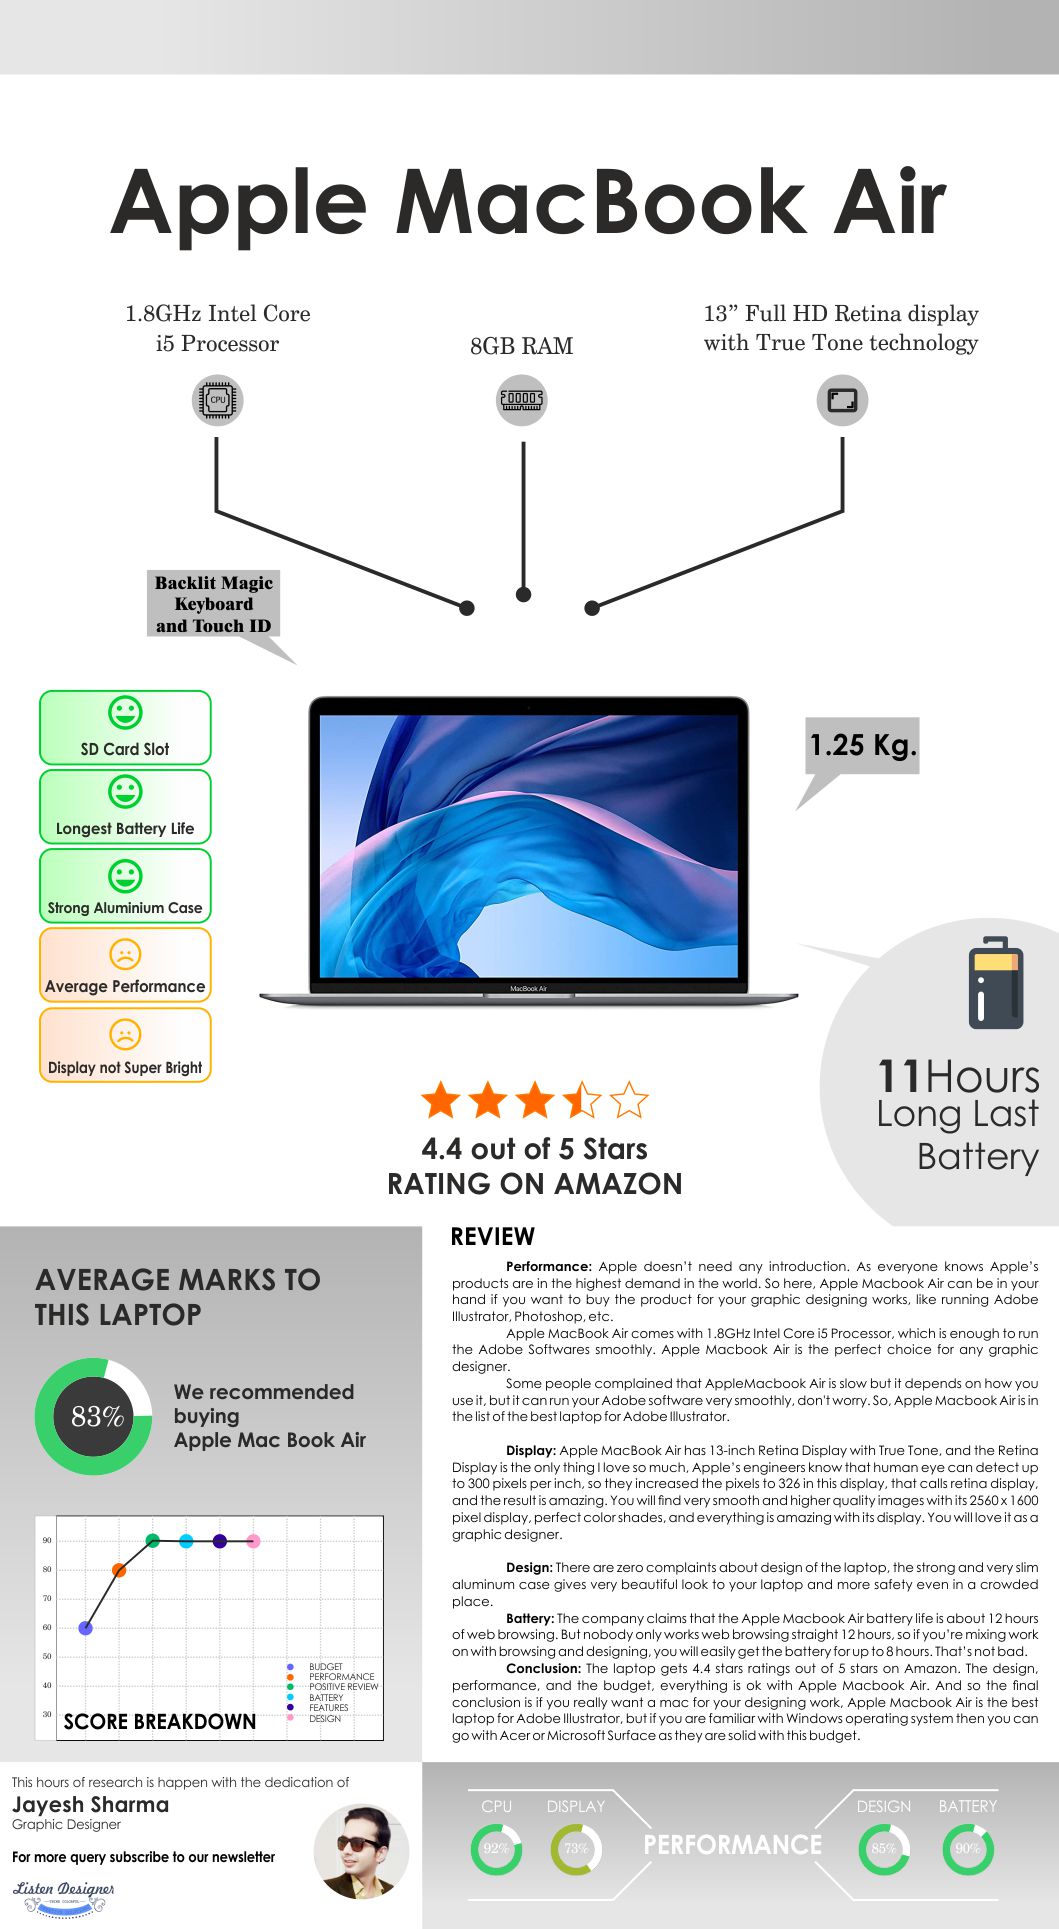 APPLE MACBOOK AIR INFOGRAPHIC REVIEW